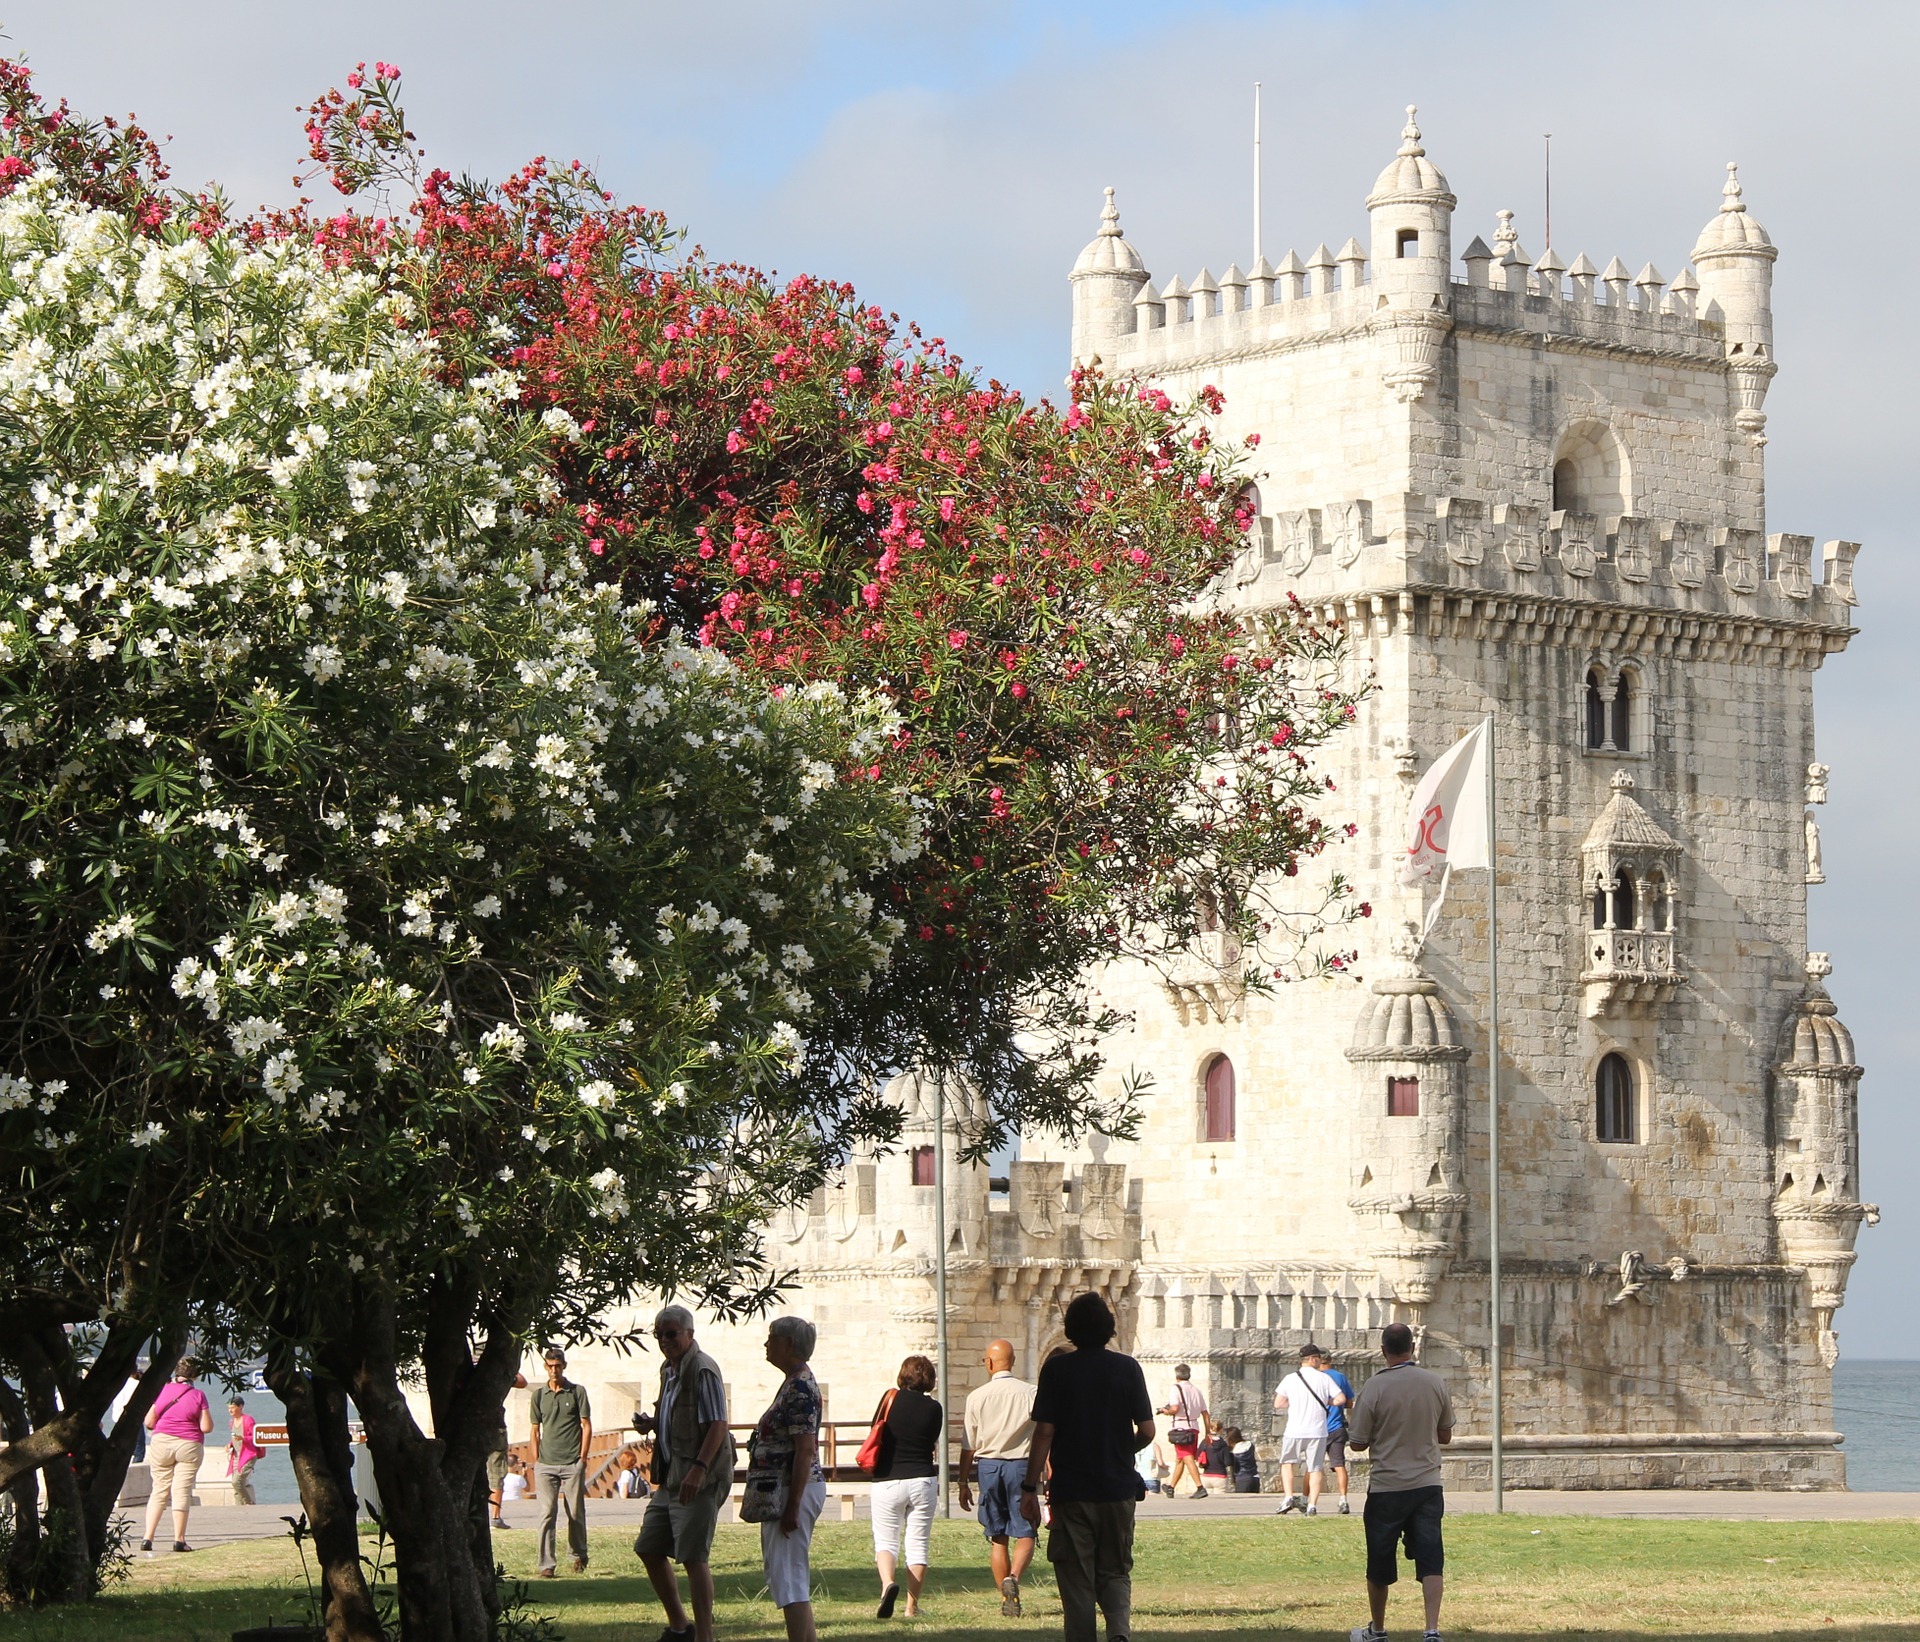 Lonely Planet considers Lisbon the 18th best destination in the world